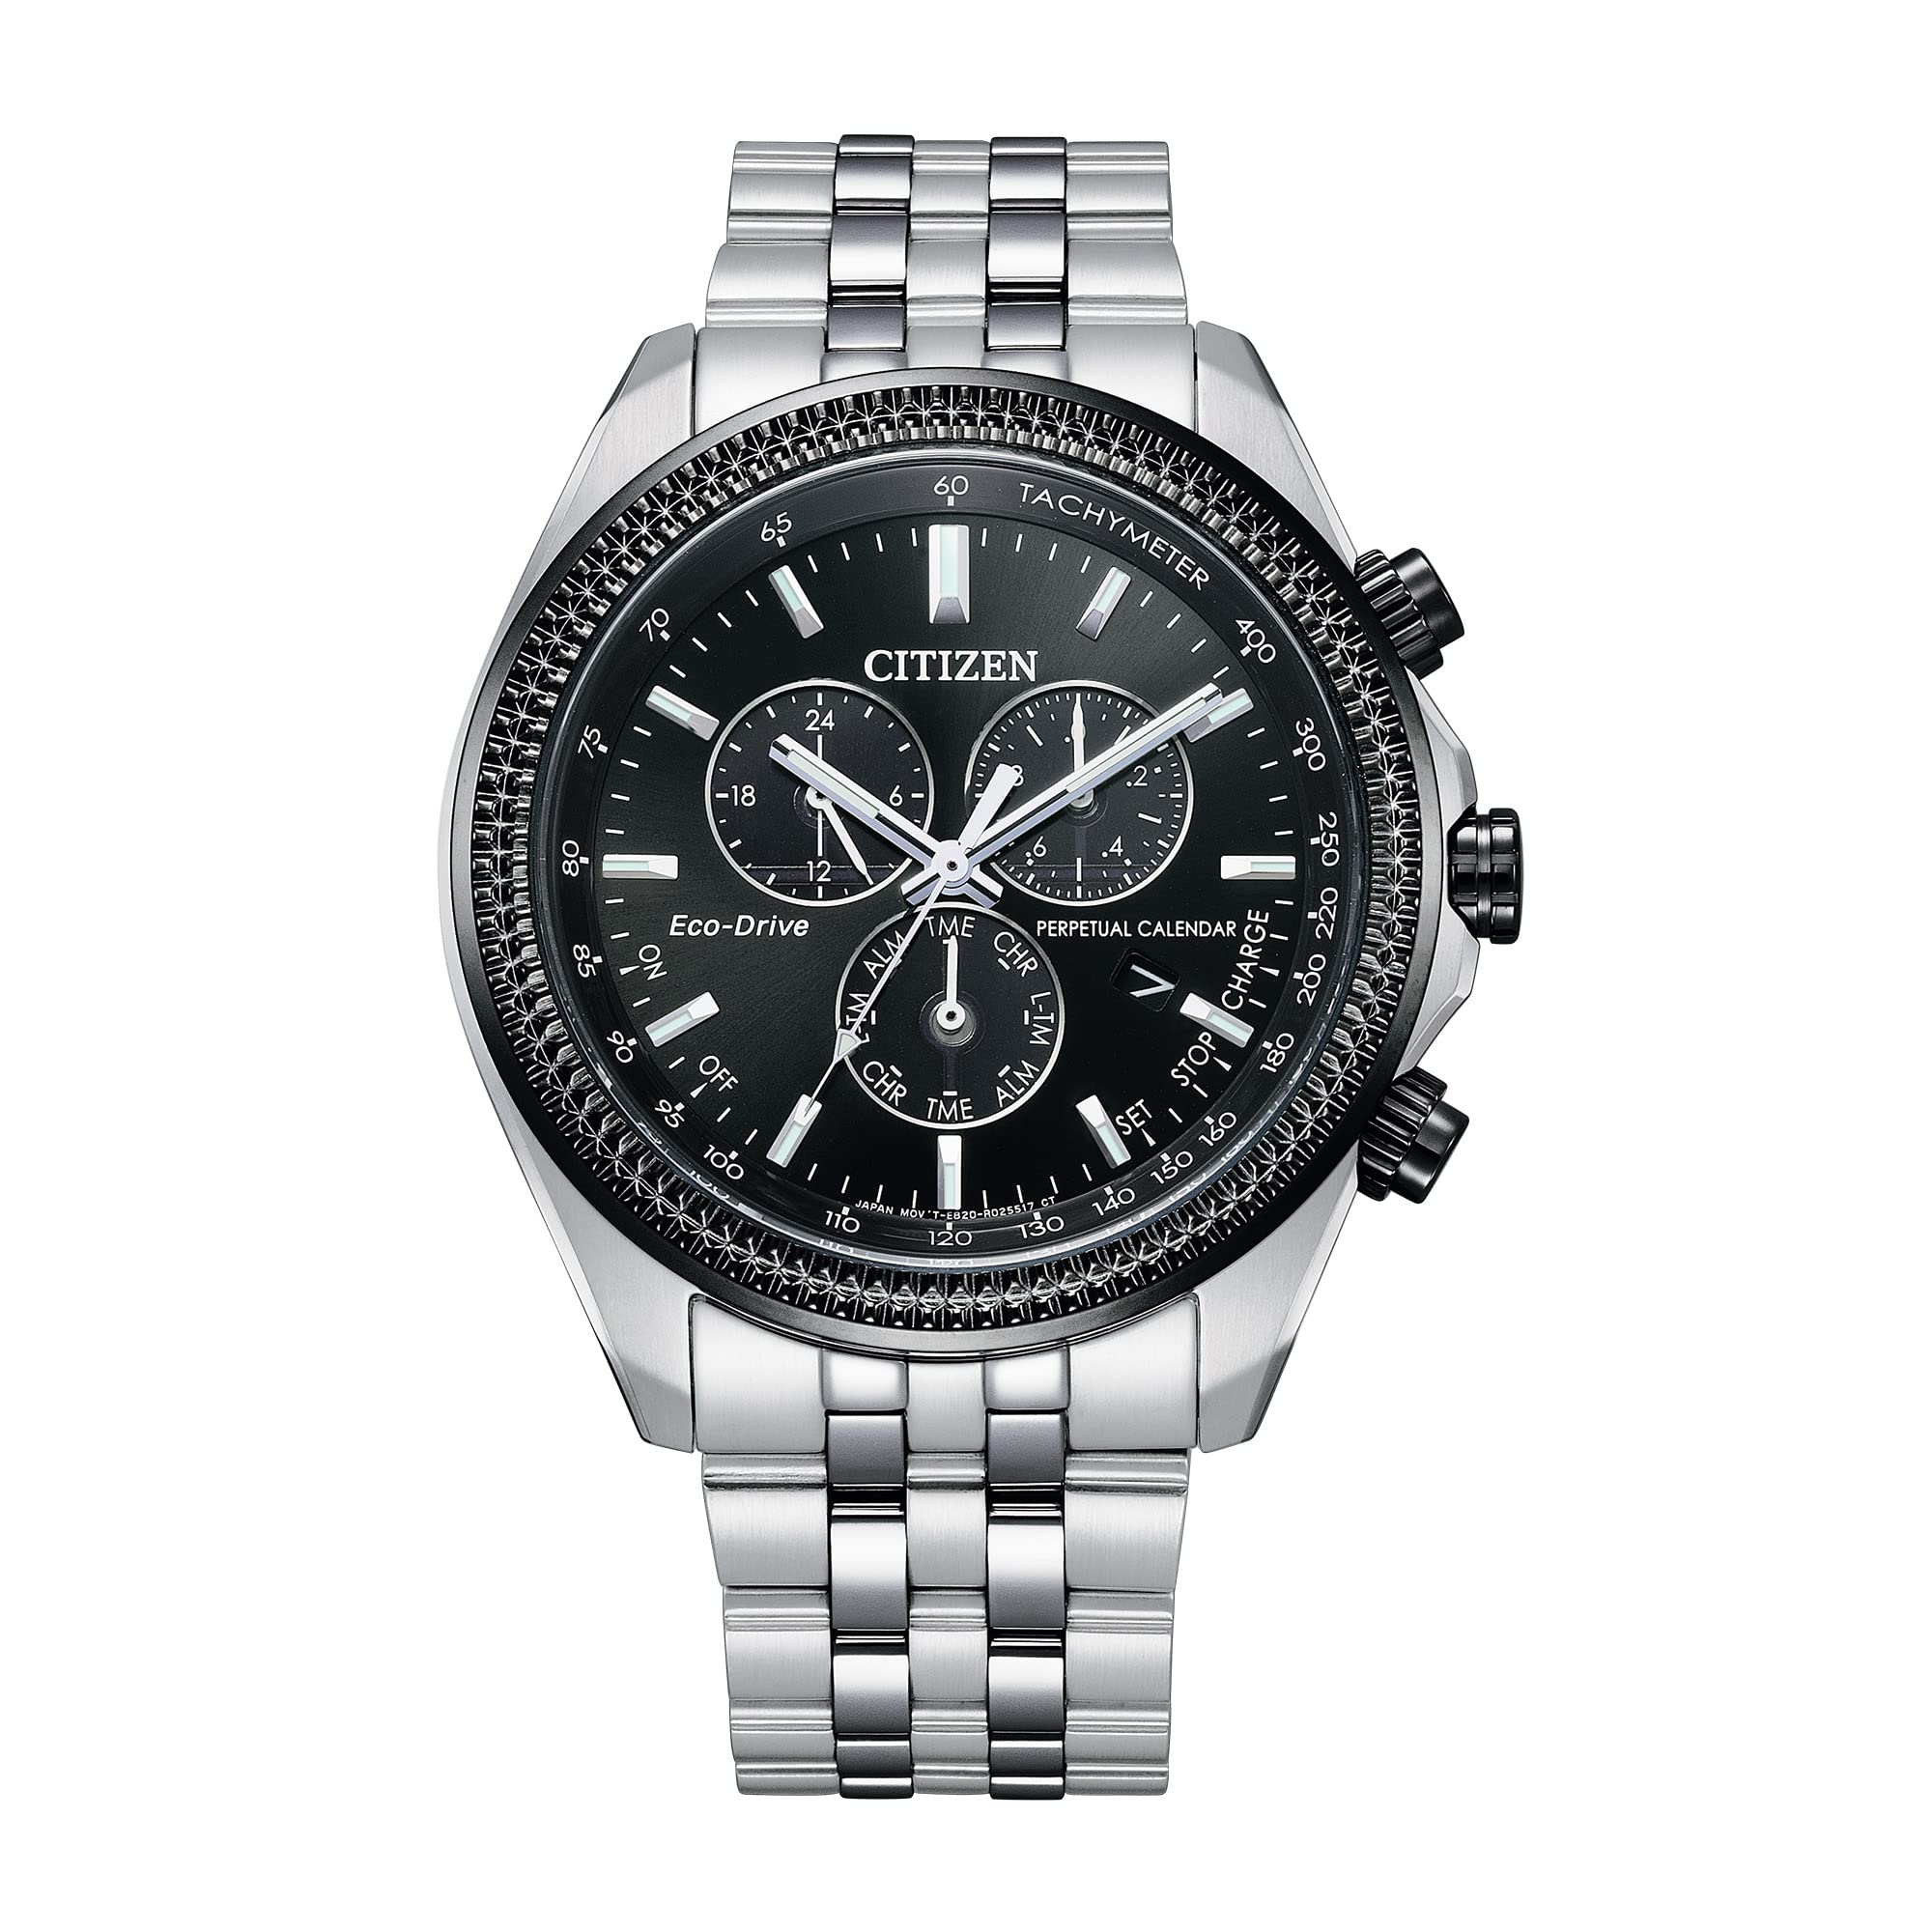 Citizen Men's Eco-Drive Classic Chronograph Watch in Stainless Steel with Perpetual Calendar, Black Dial (Model: BL5566-50E), Silver-Tone and Black